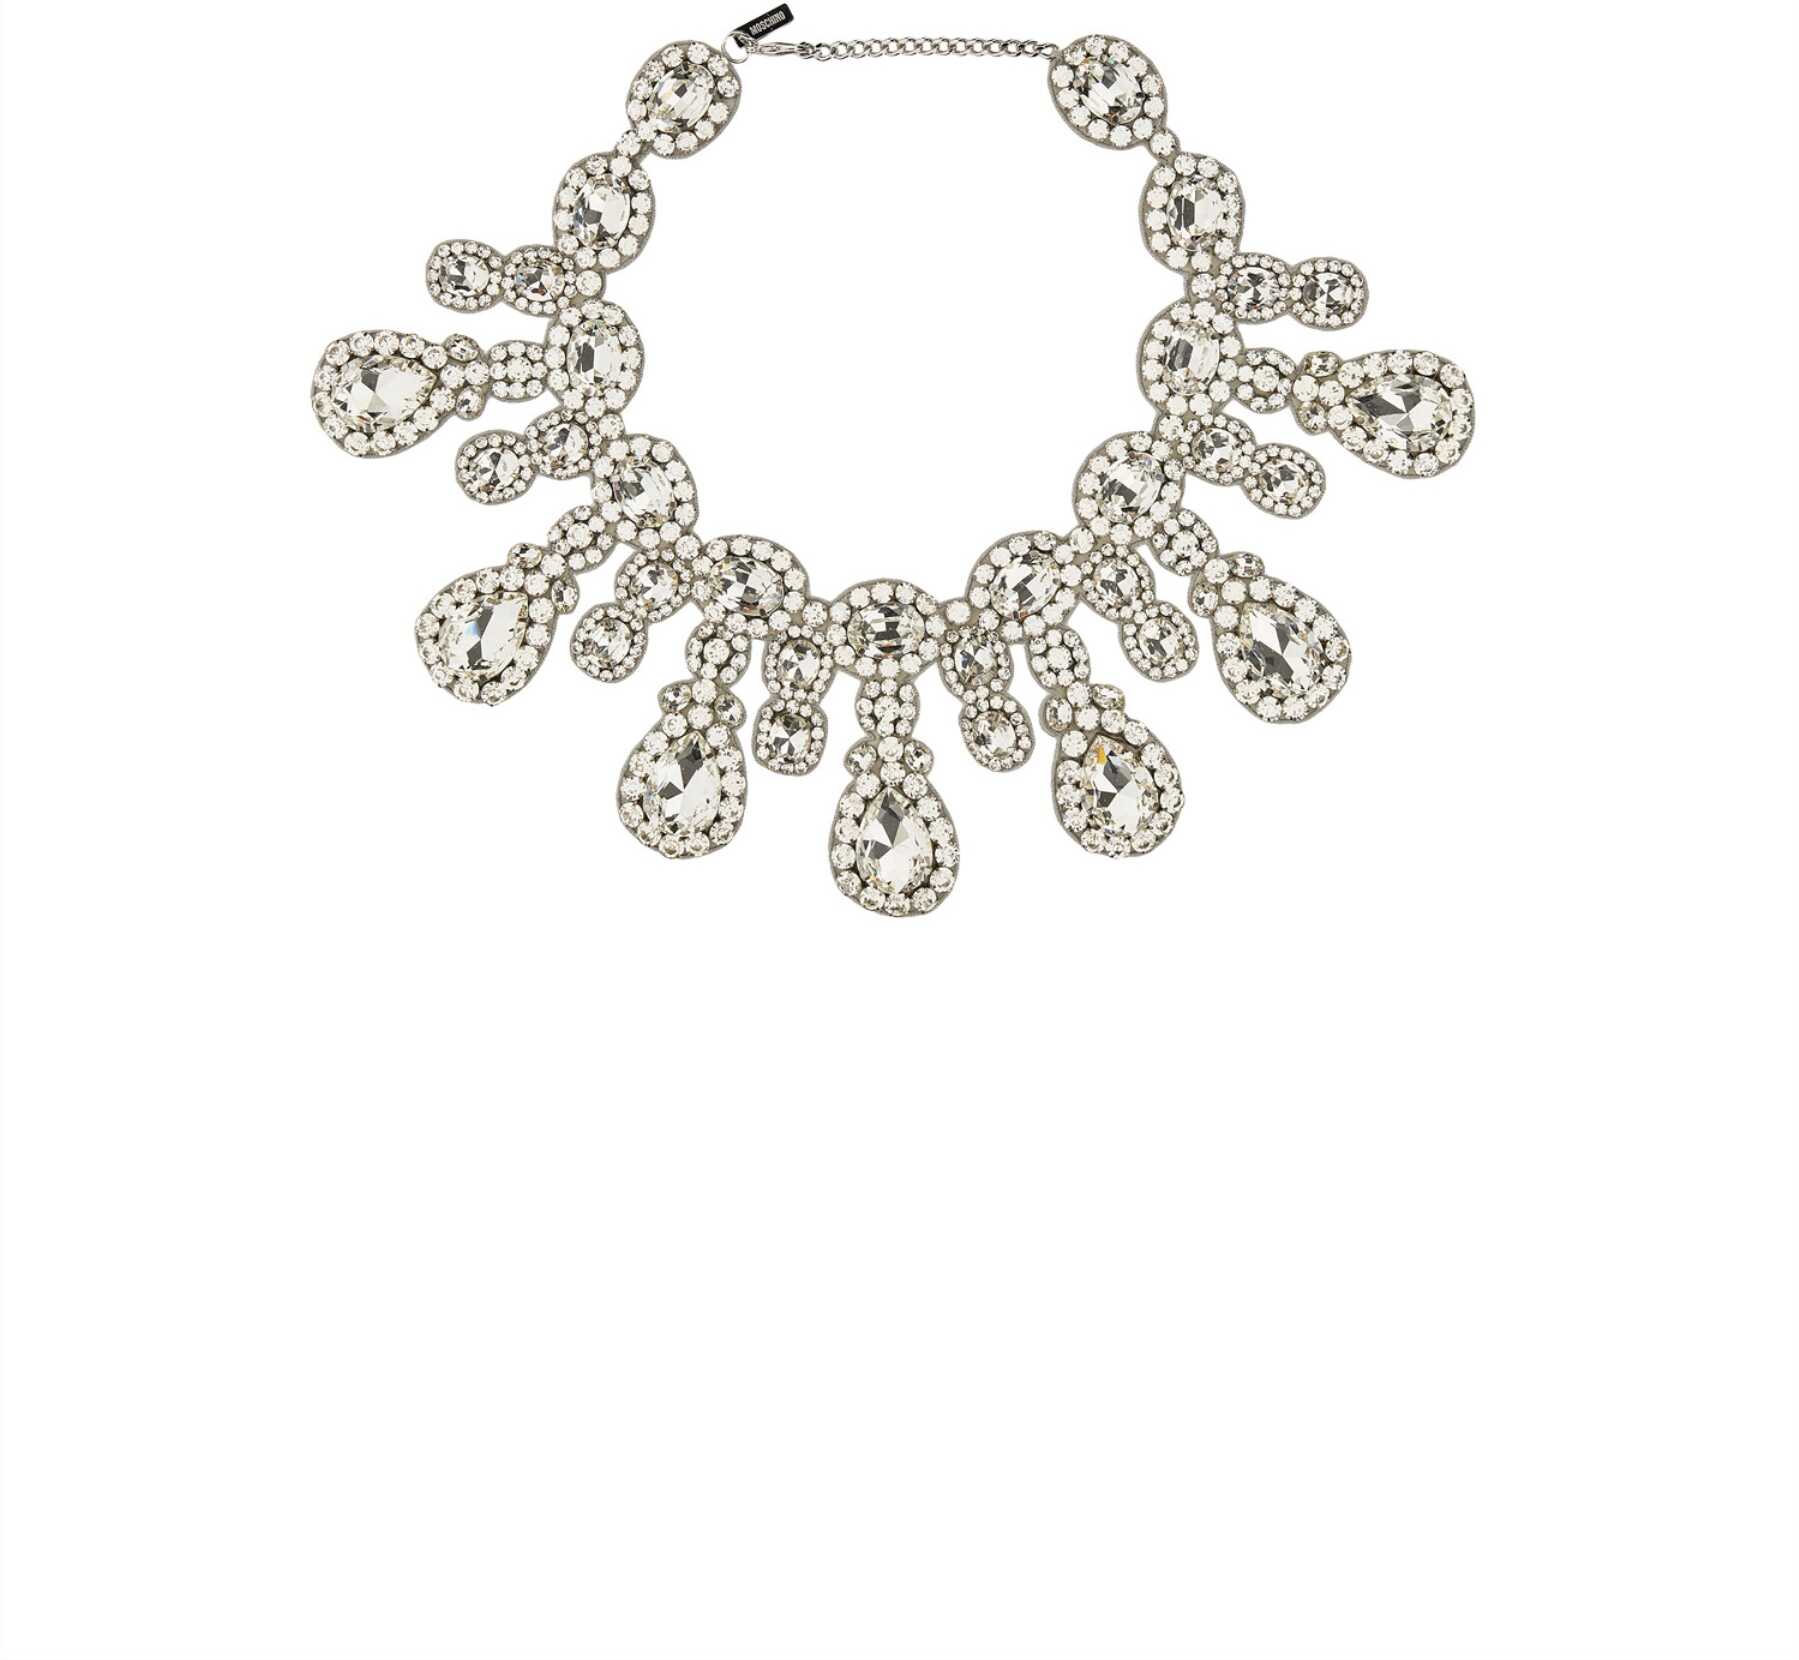 Moschino Necklace With Stones SILVER image1